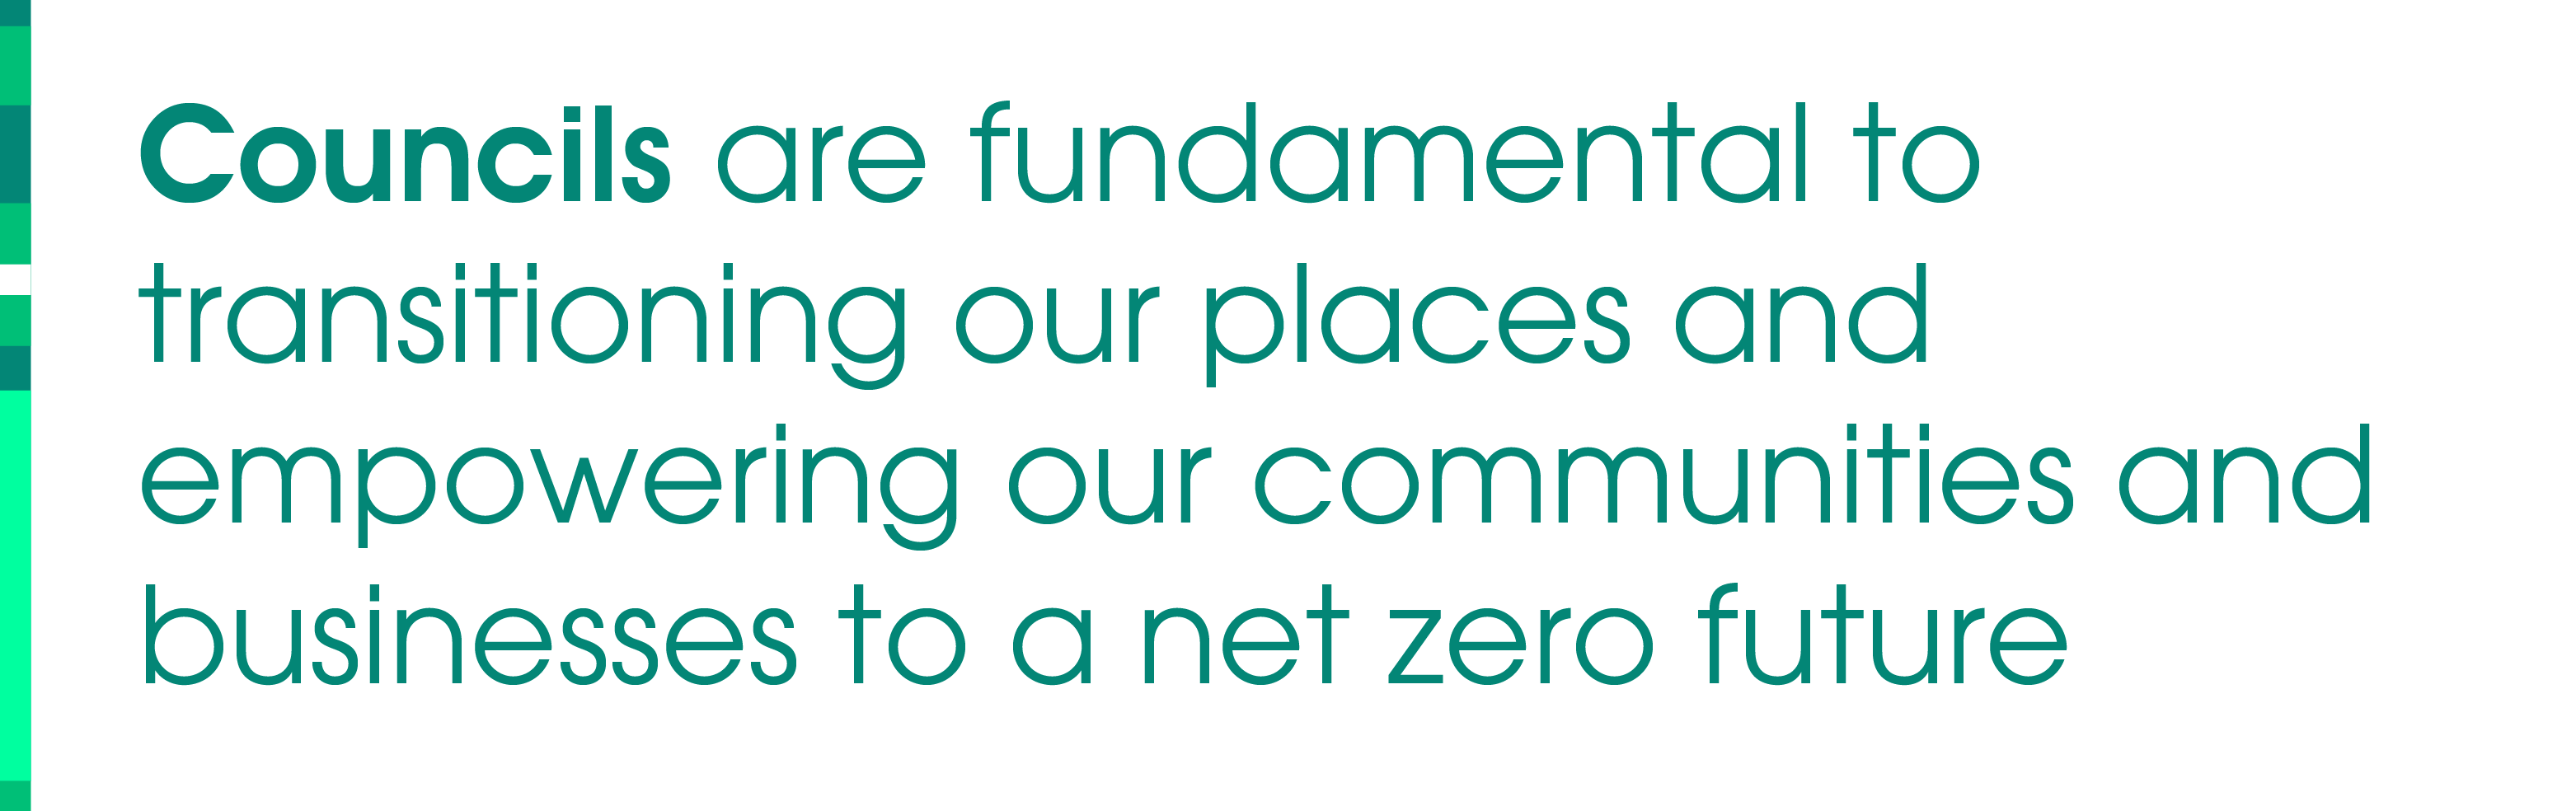 Councils are fundamental to transitioning our places and empowering our communities and businesses to a net zero future.